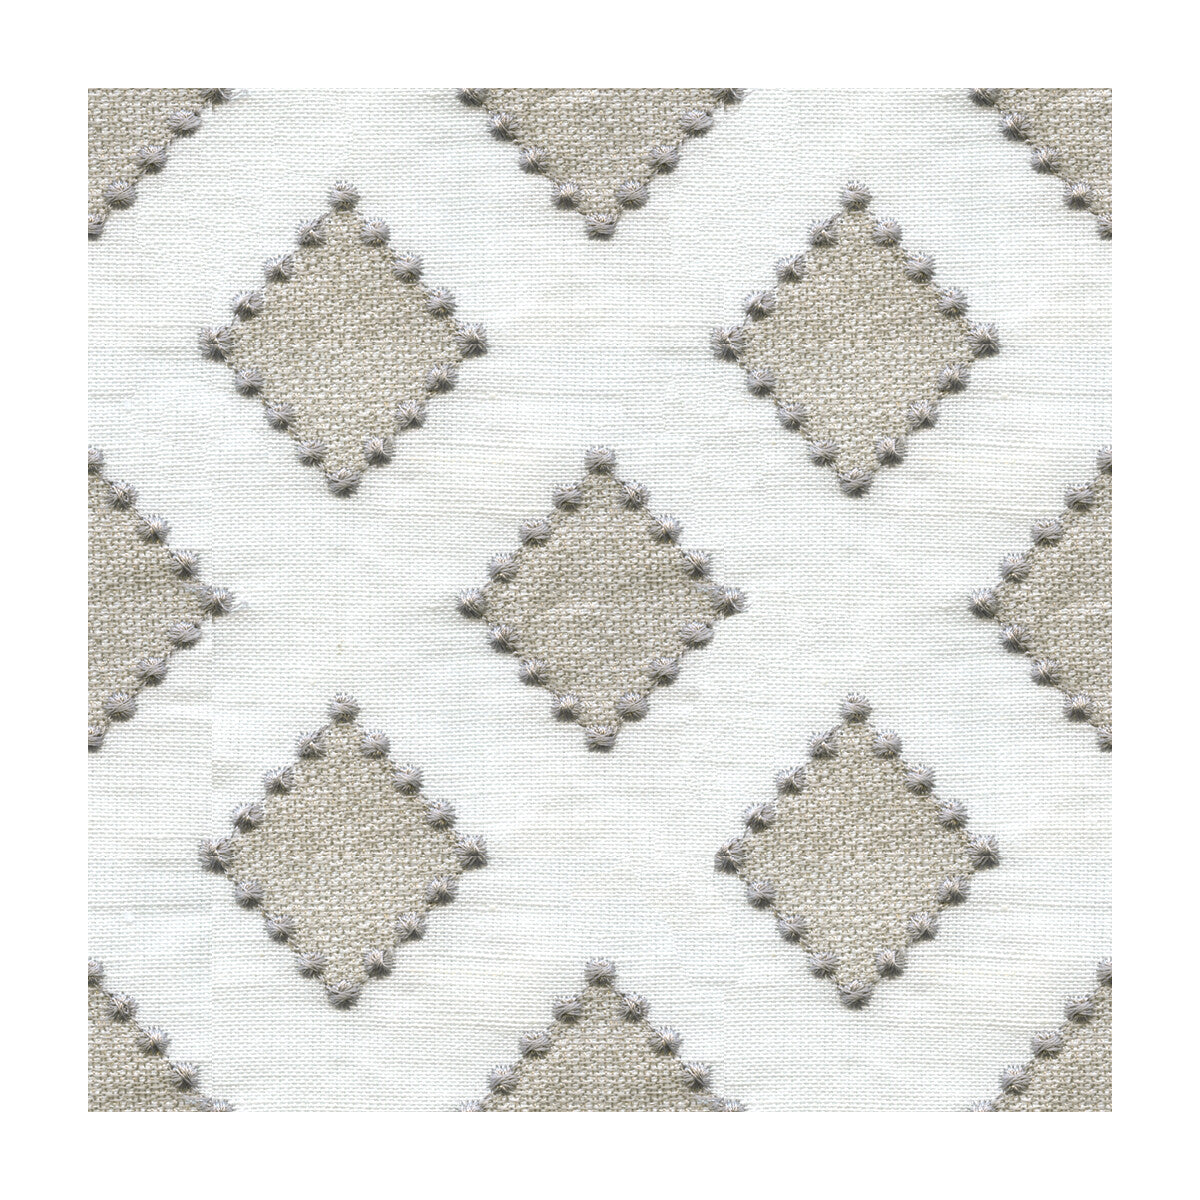 Diamondots fabric in linen color - pattern 34267.1611.0 - by Kravet Basics in the Sarah Richardson Harmony collection